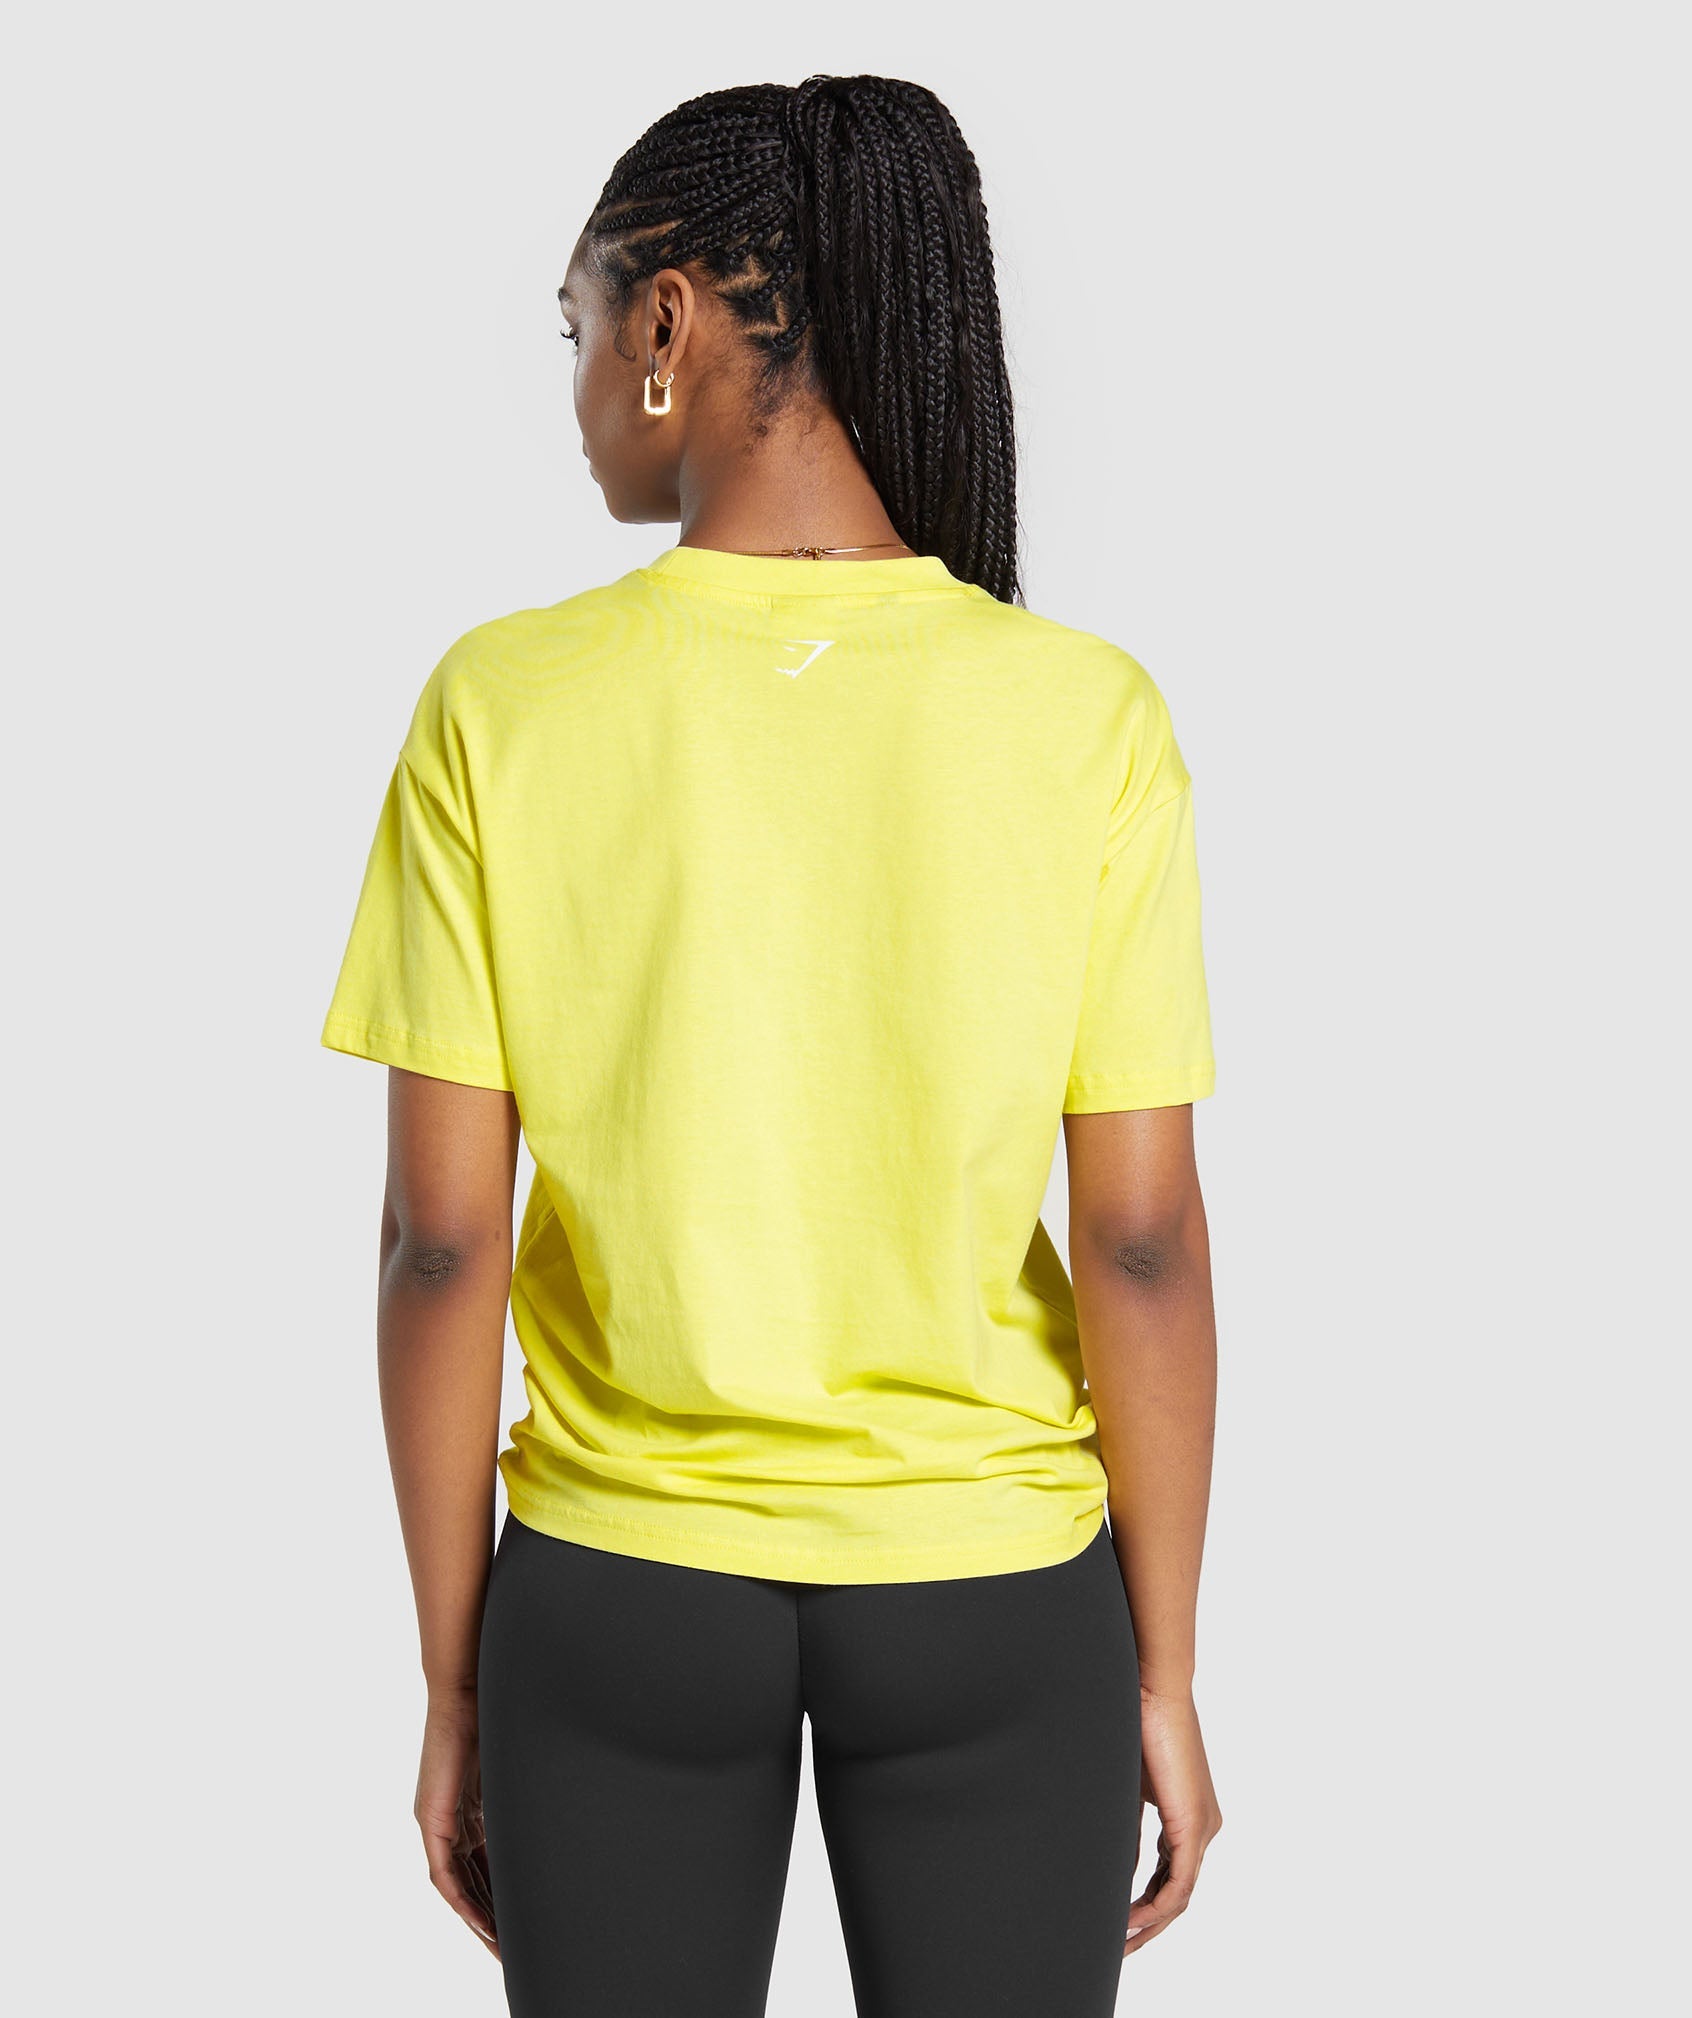 Protein & Dreams Oversized T-Shirt in Lemon Yellow - view 2